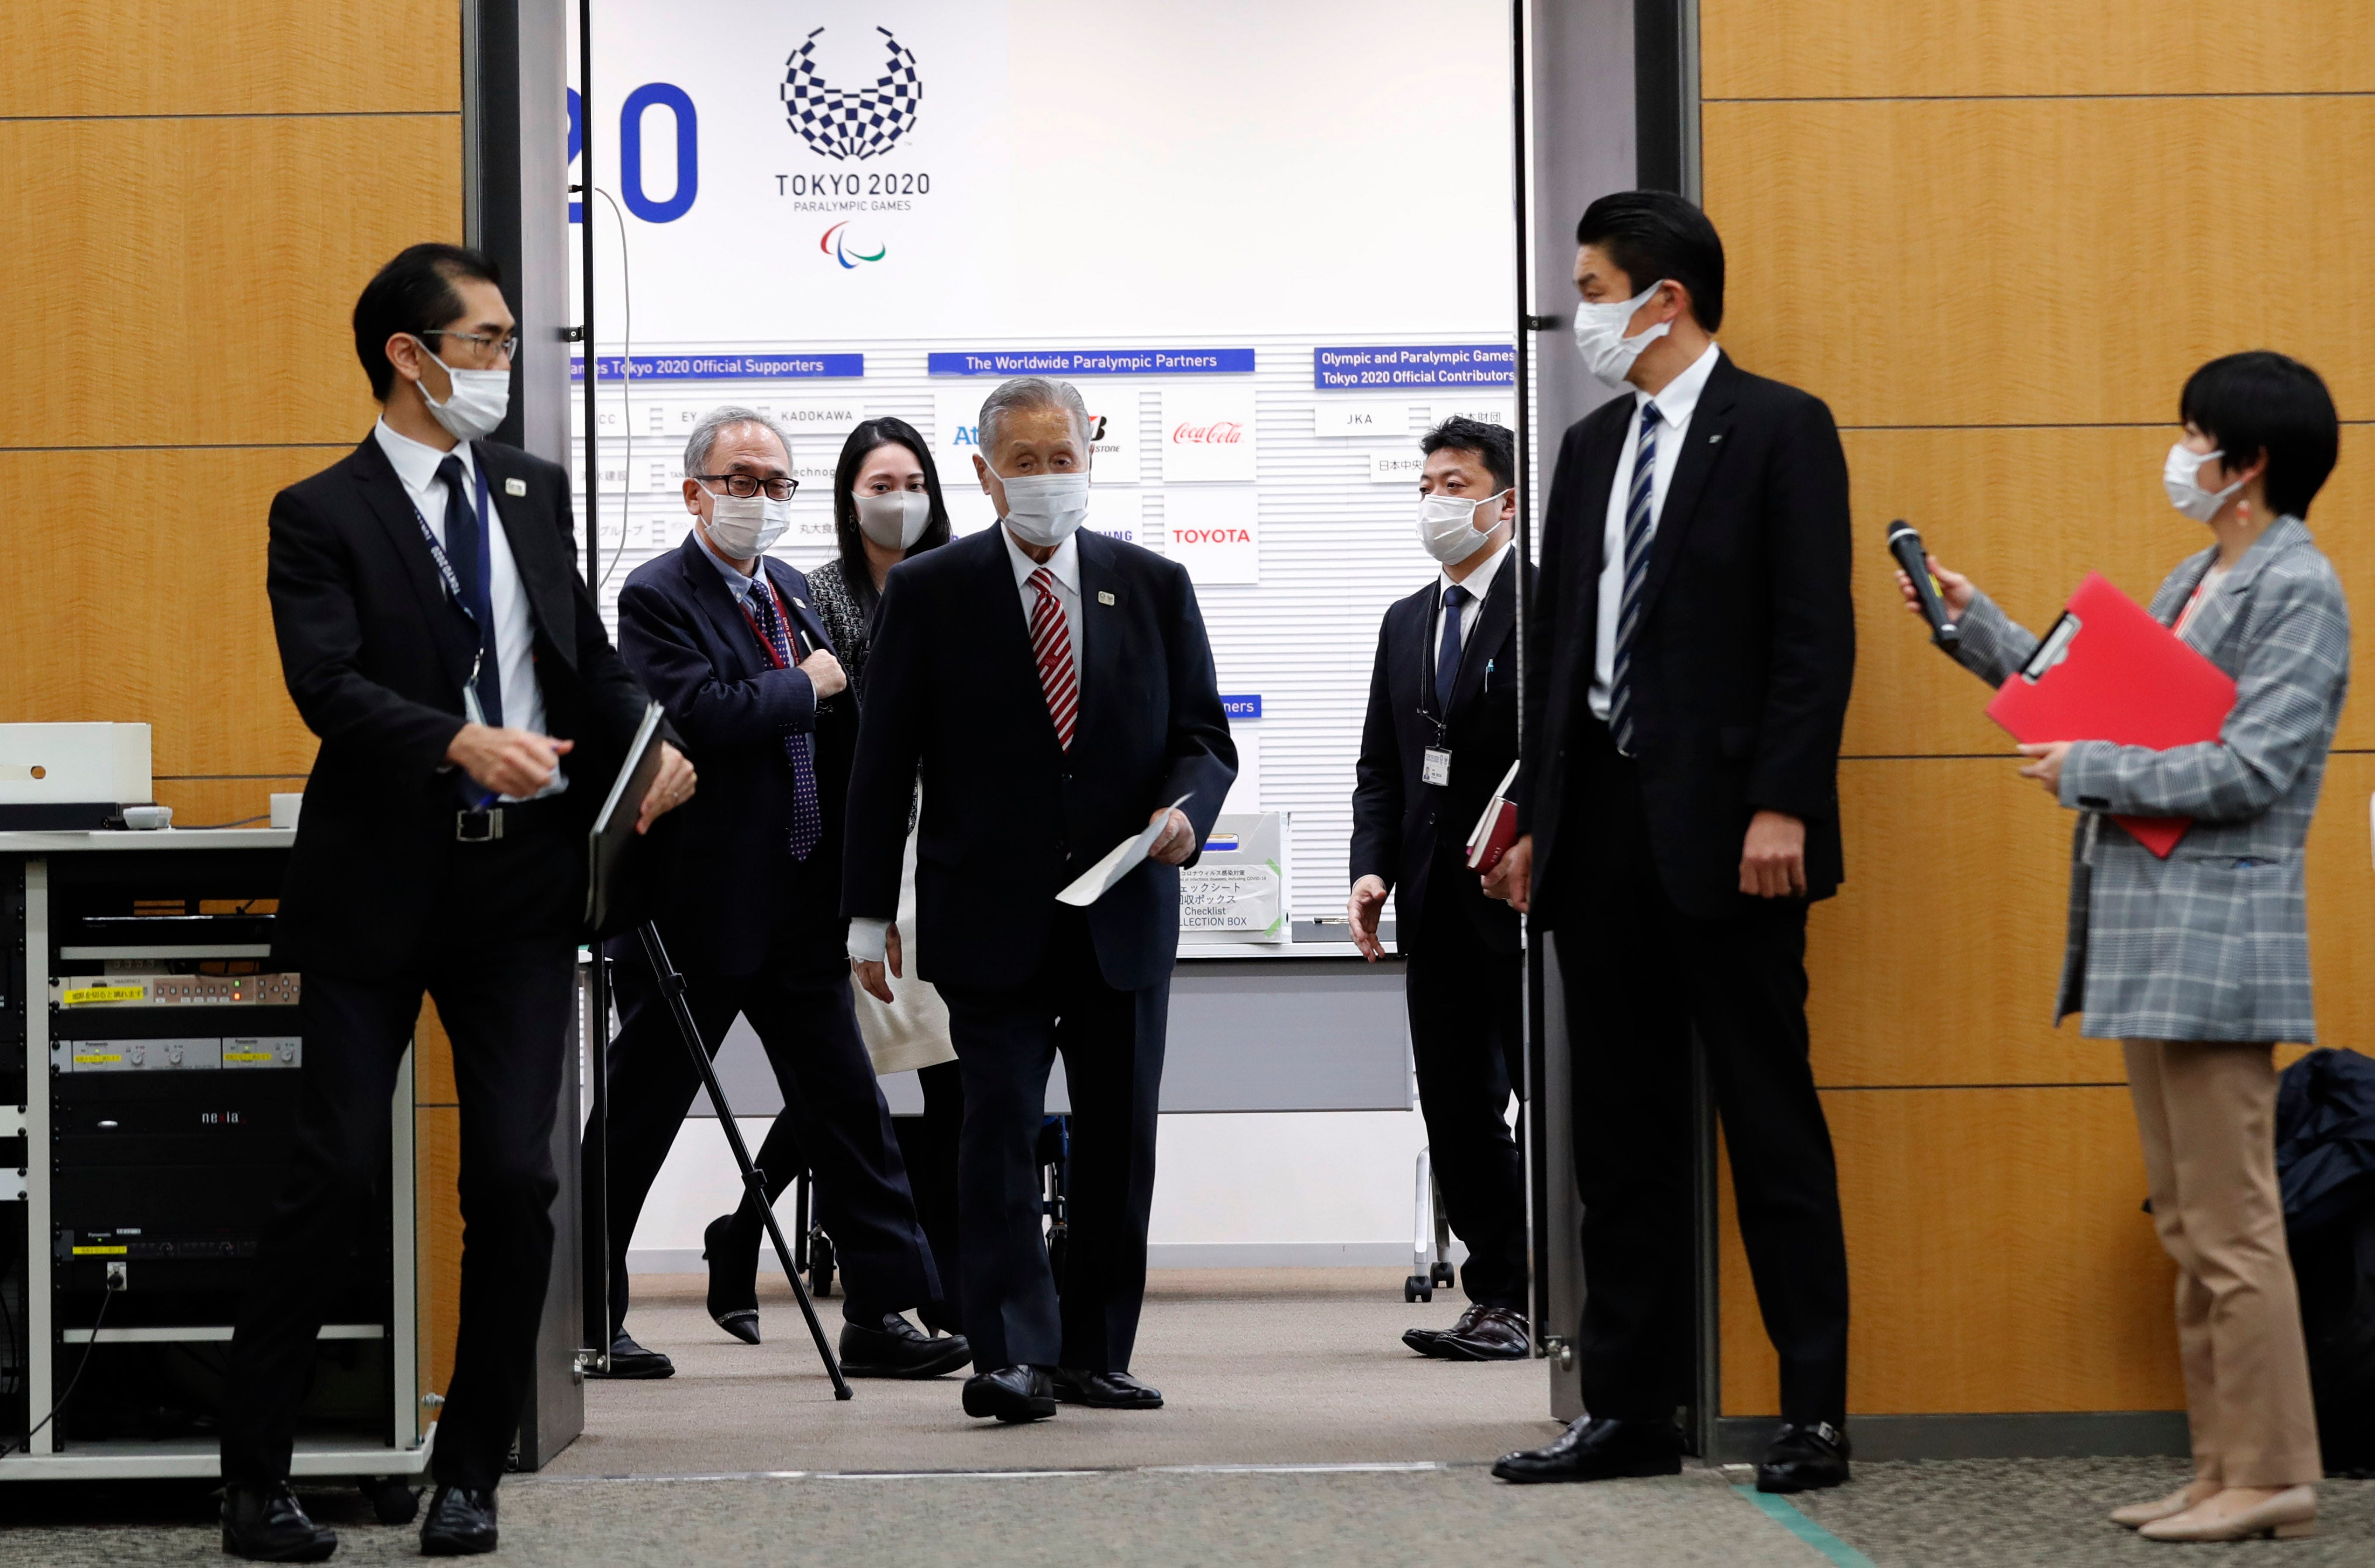 Tokyo Olympics Organizing Committee President Yoshiro Mori arrives at a press conference on February 4, 2021 in Tokyo, Japan.